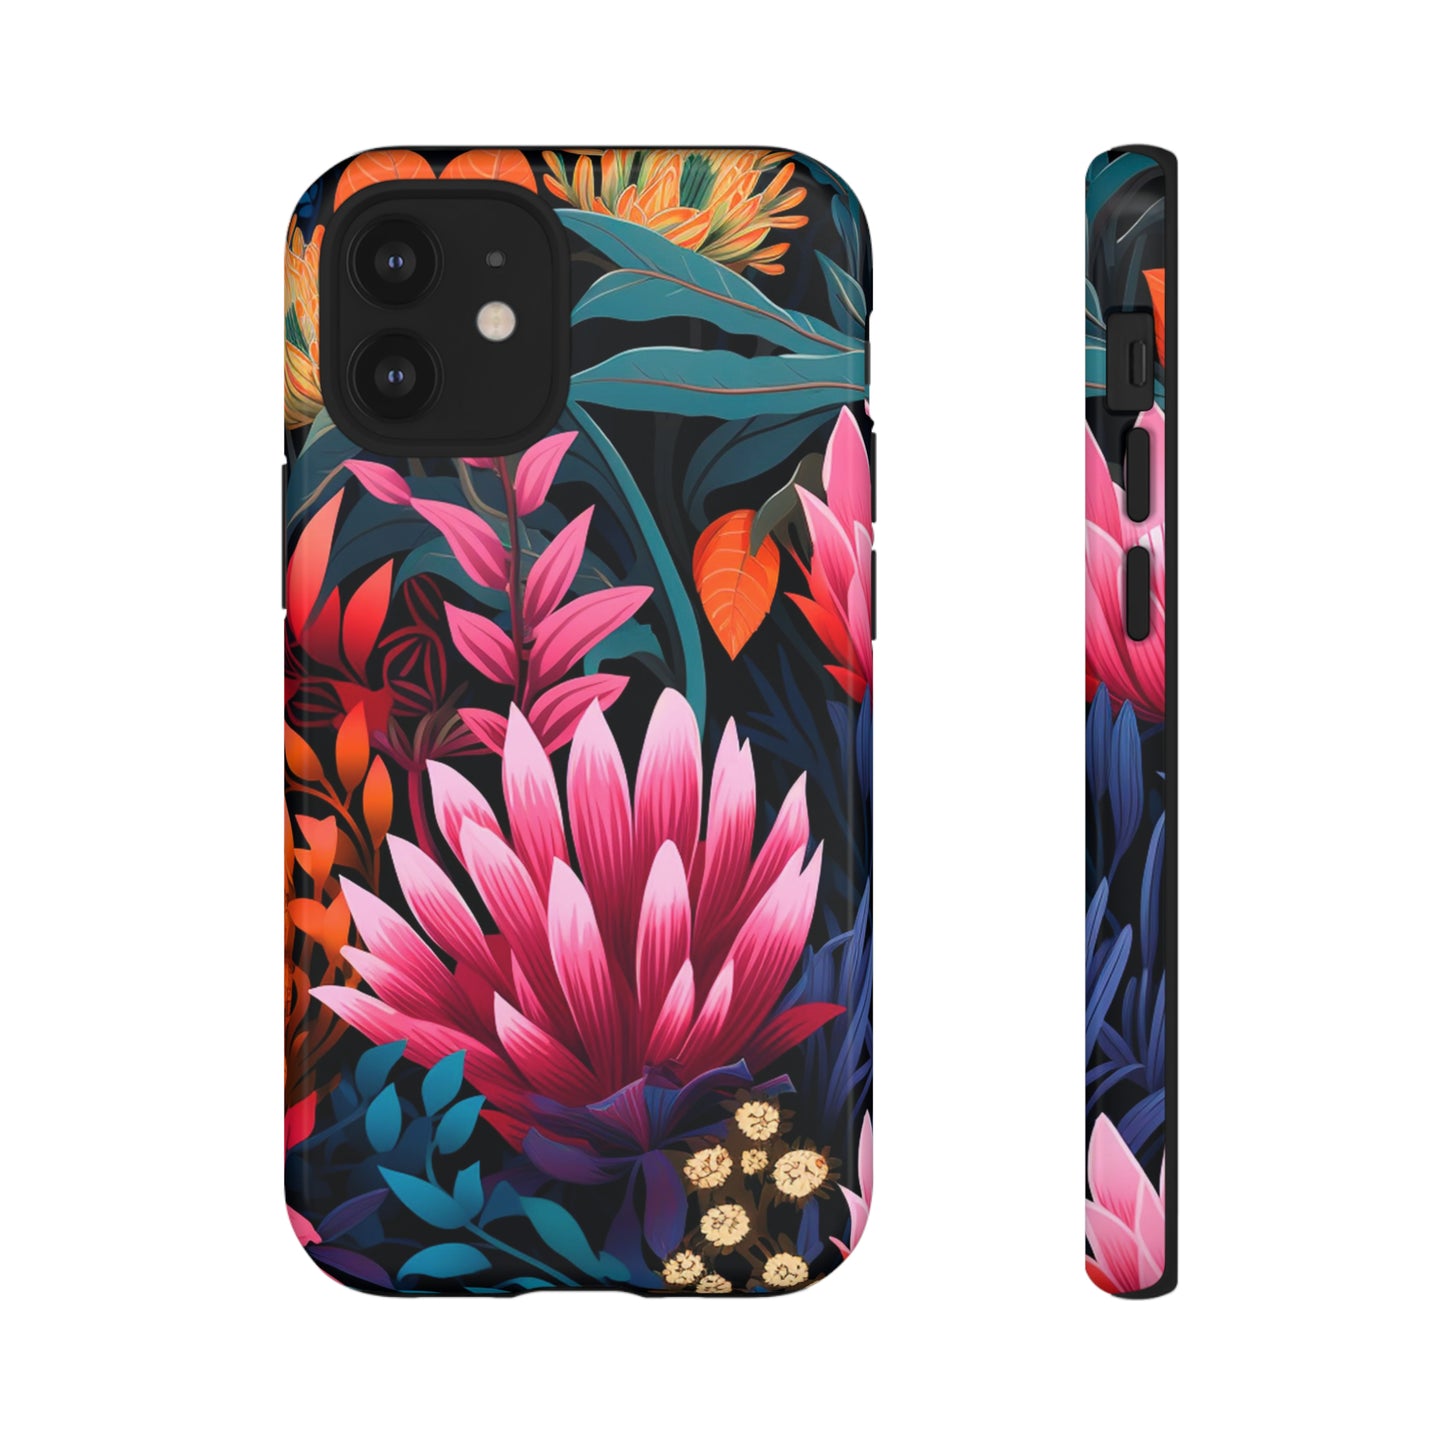 IPhone Cases, Colorful Floral IPhone Cases